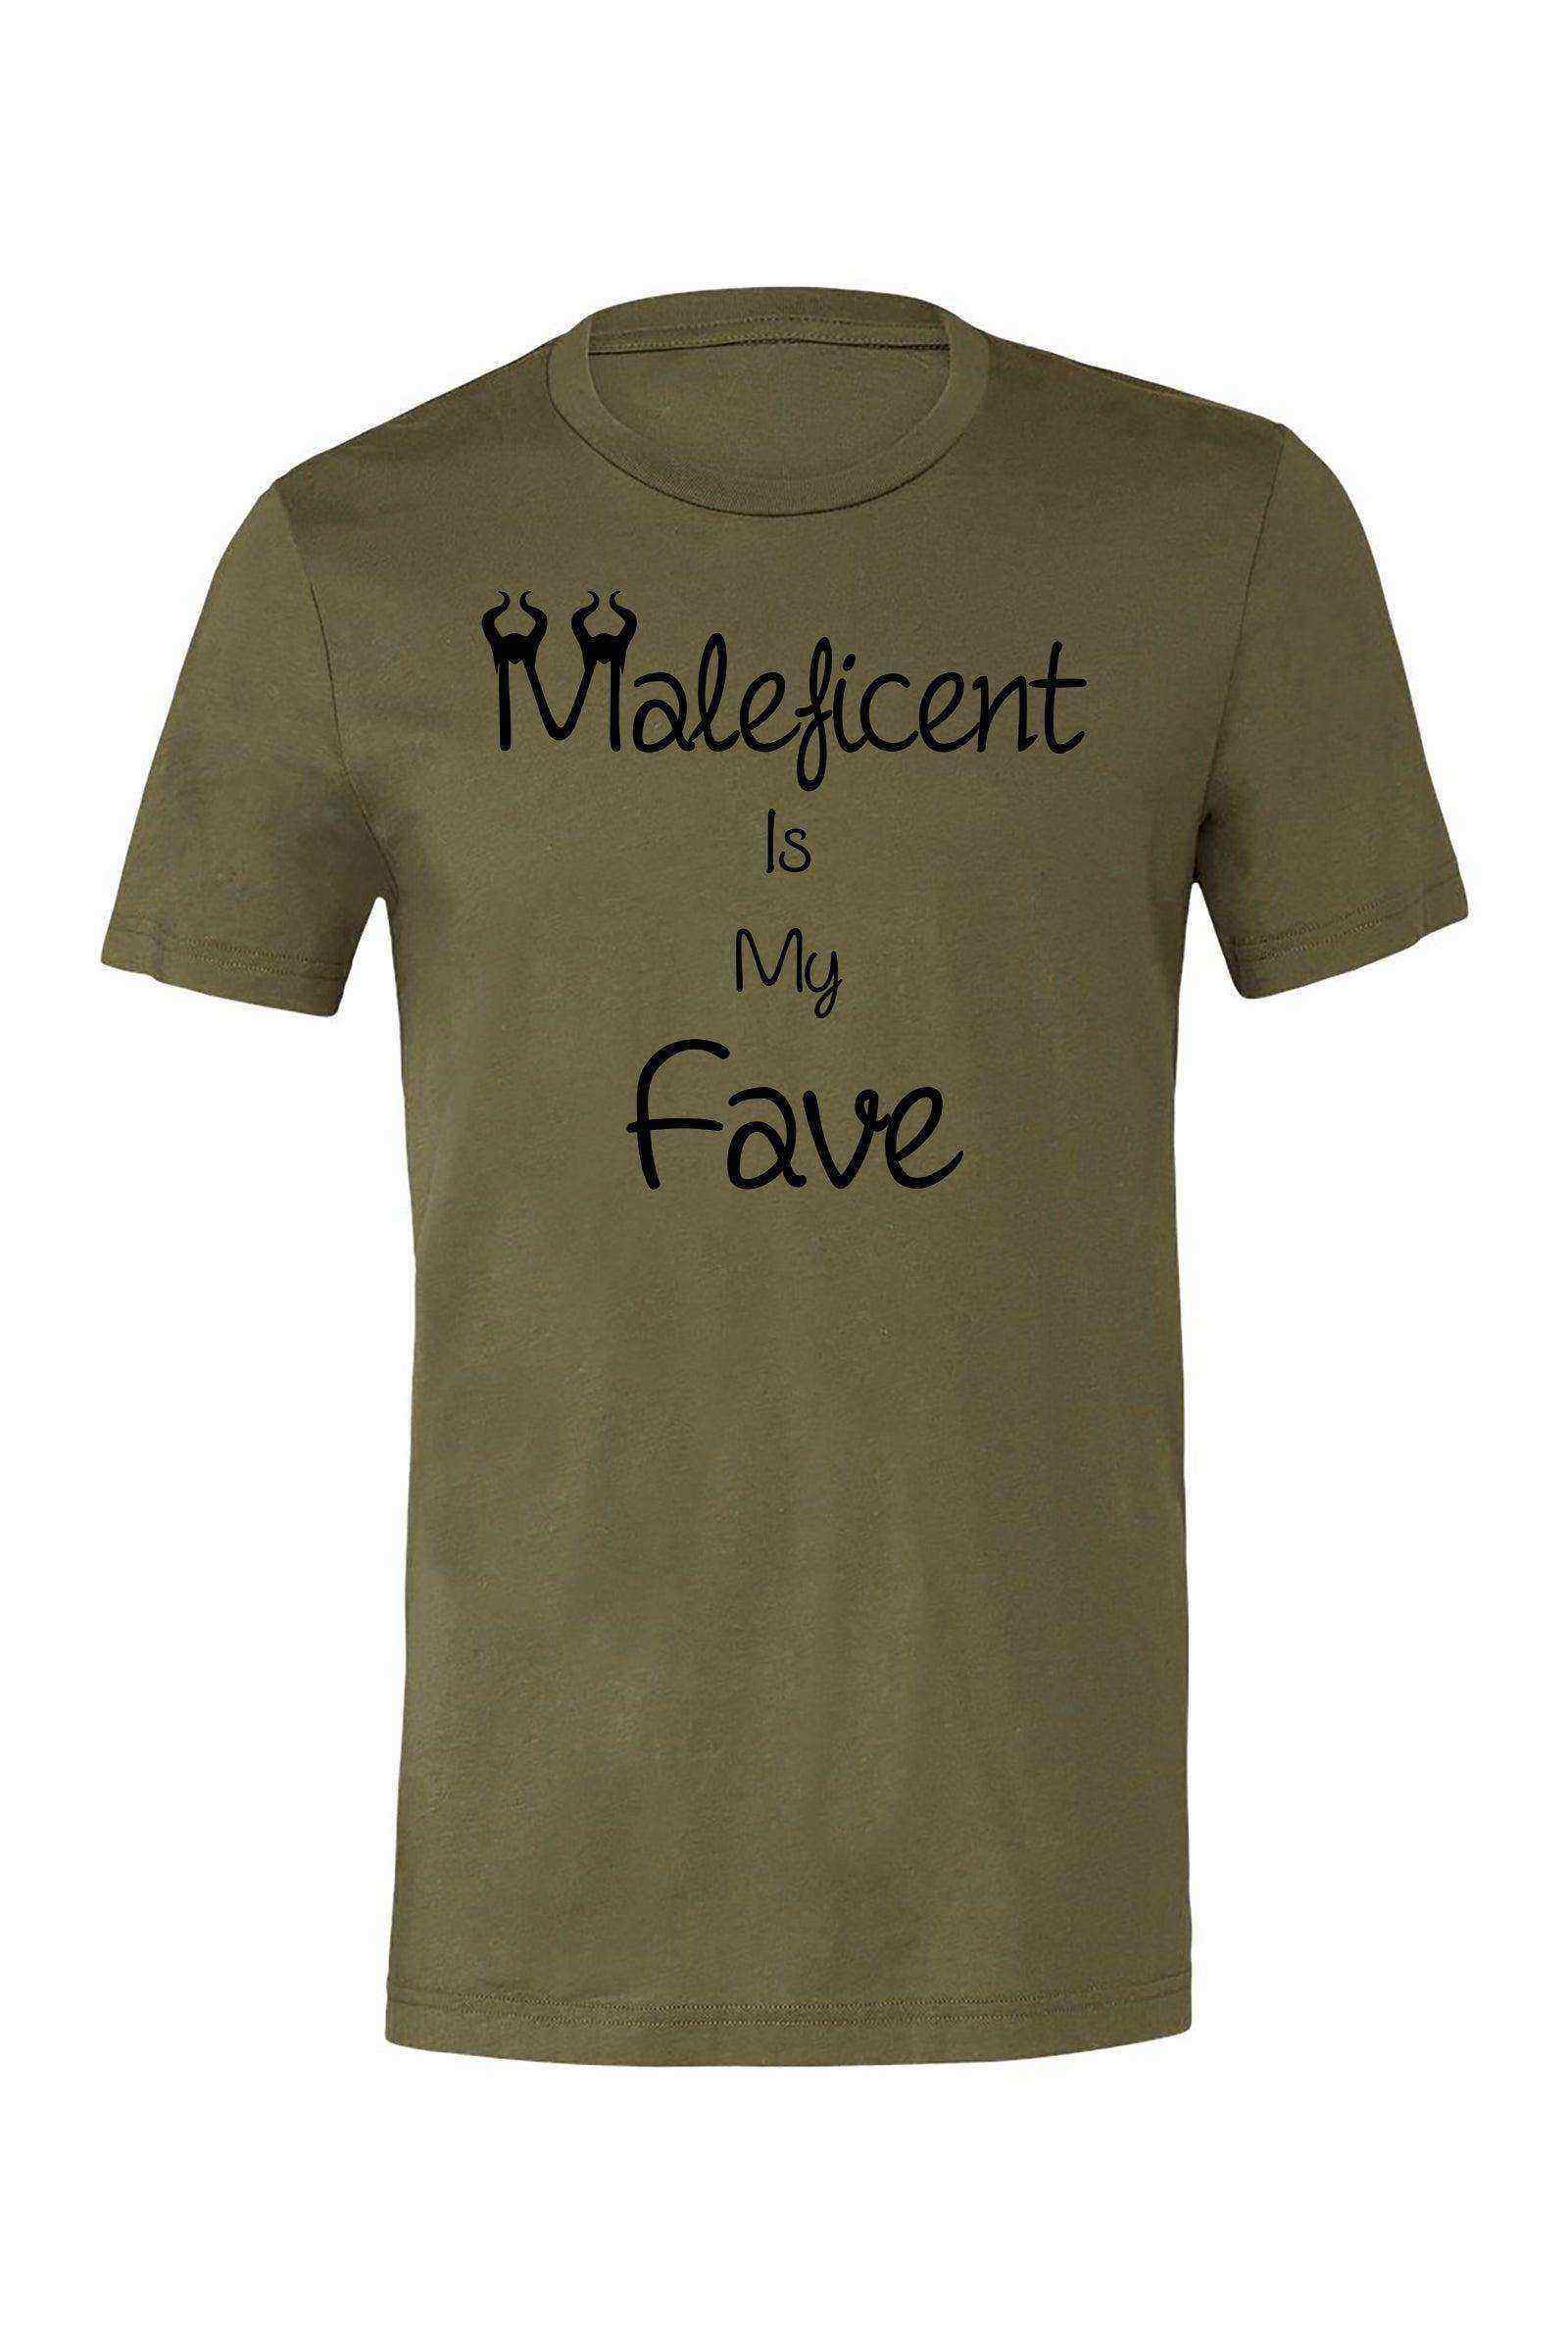 Womens | Maleficent is my Fave Shirt - Dylan's Tees